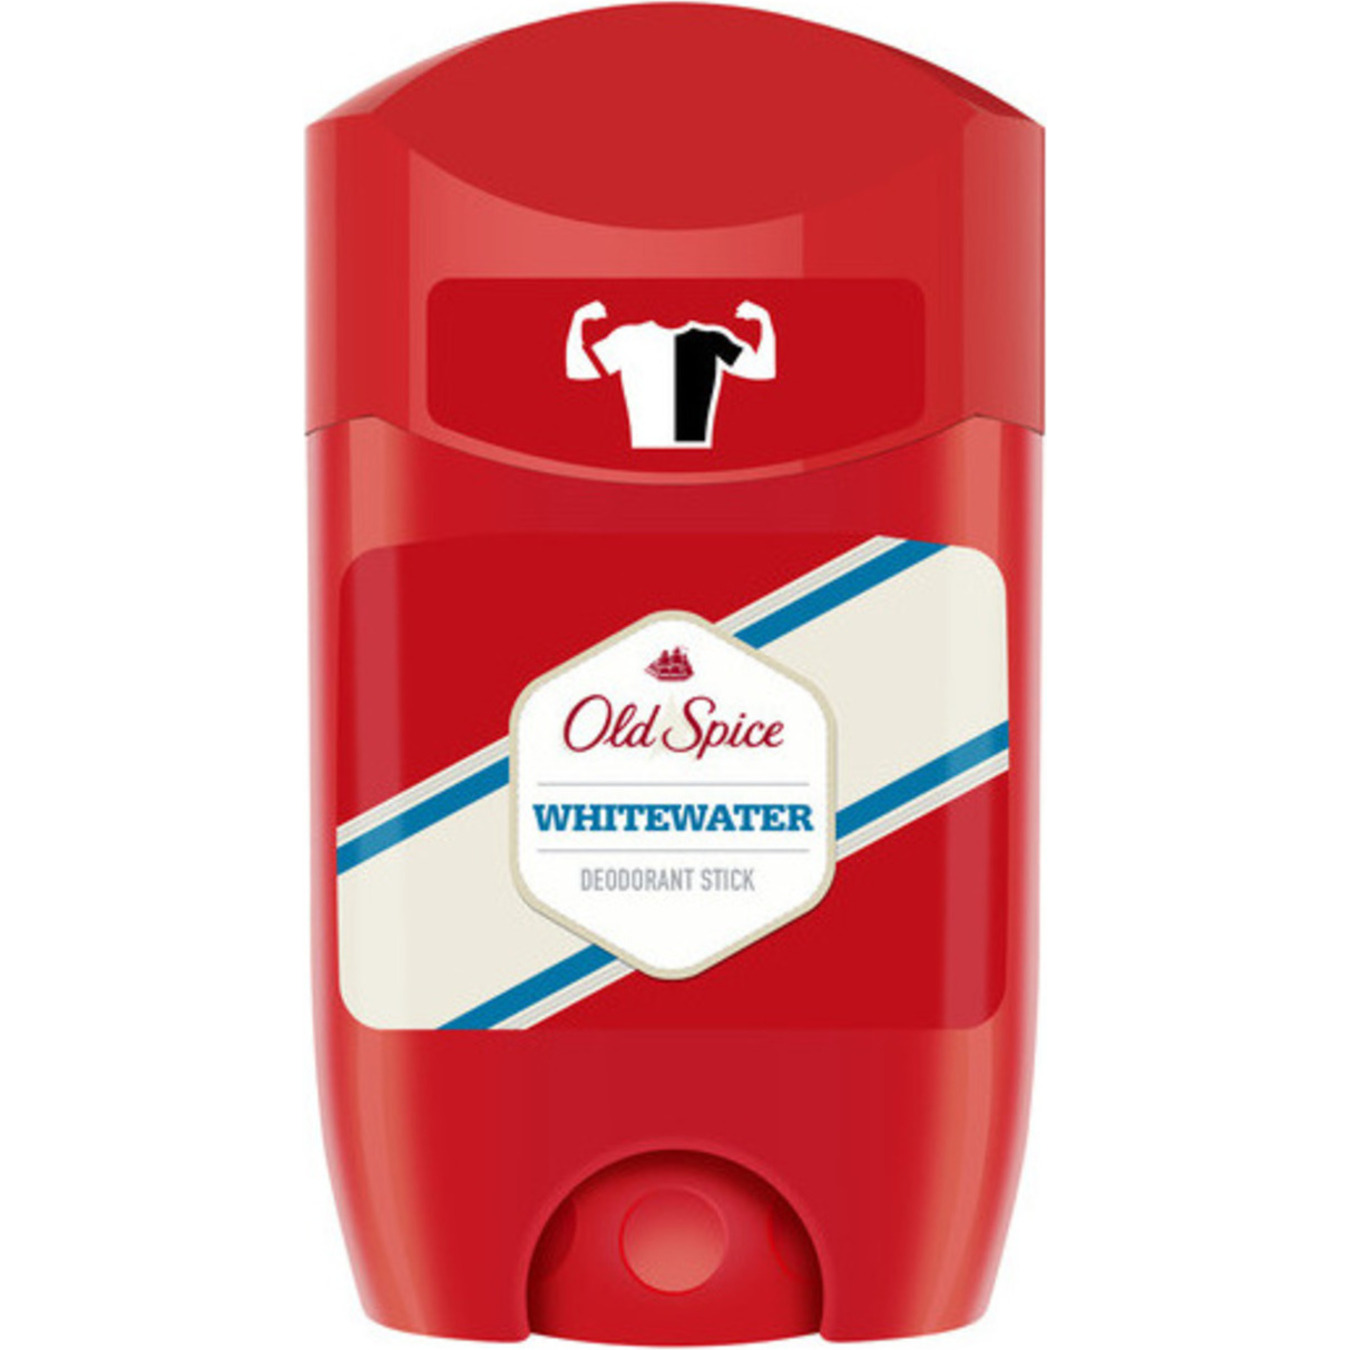 Old Spice WhiteWater solid deodorant 50ml